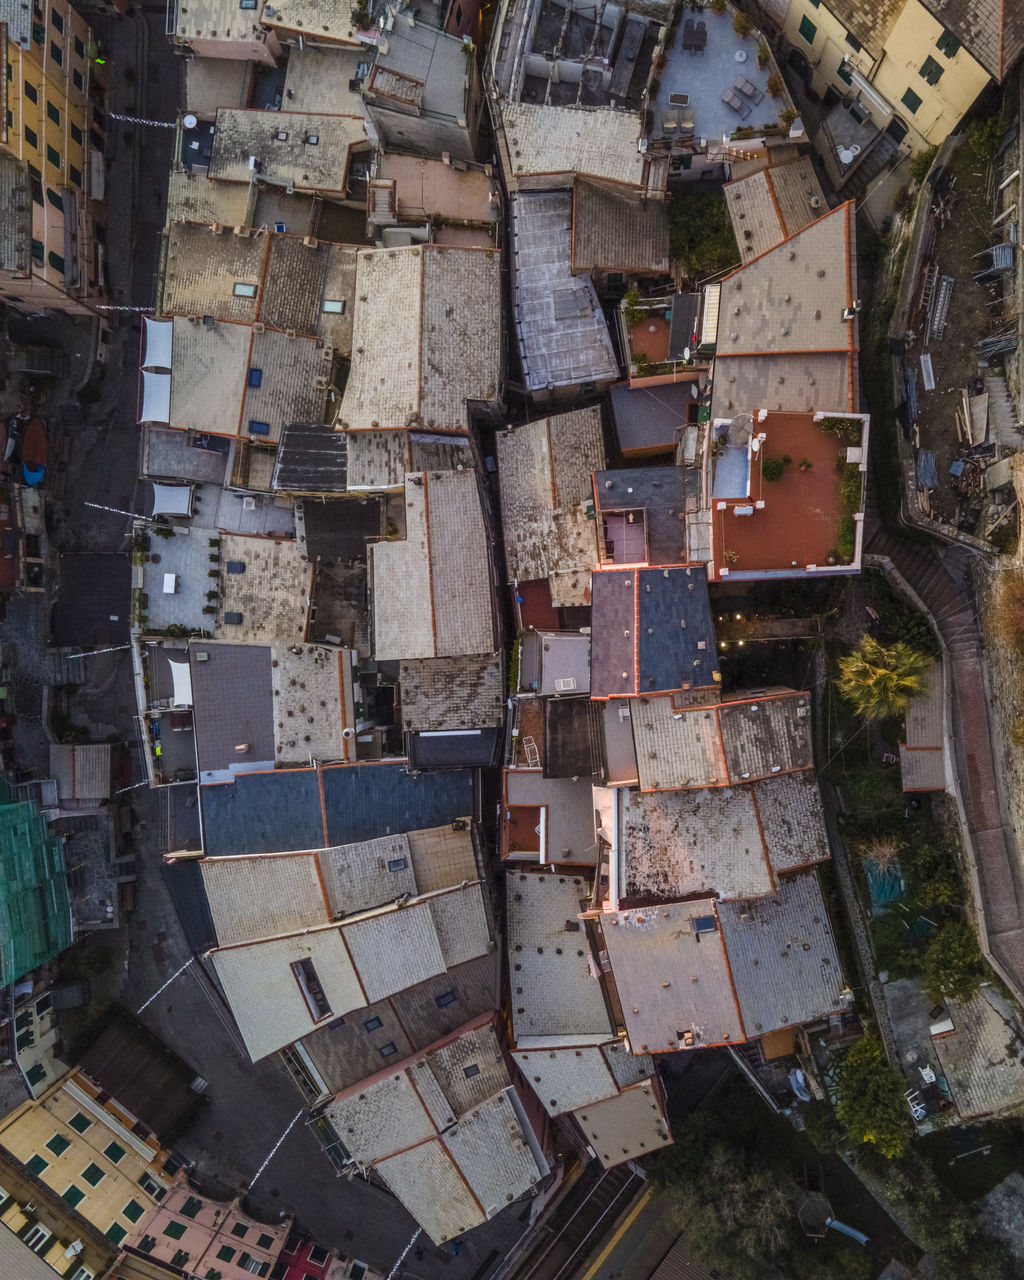 Aerial view of buildings and houses in town